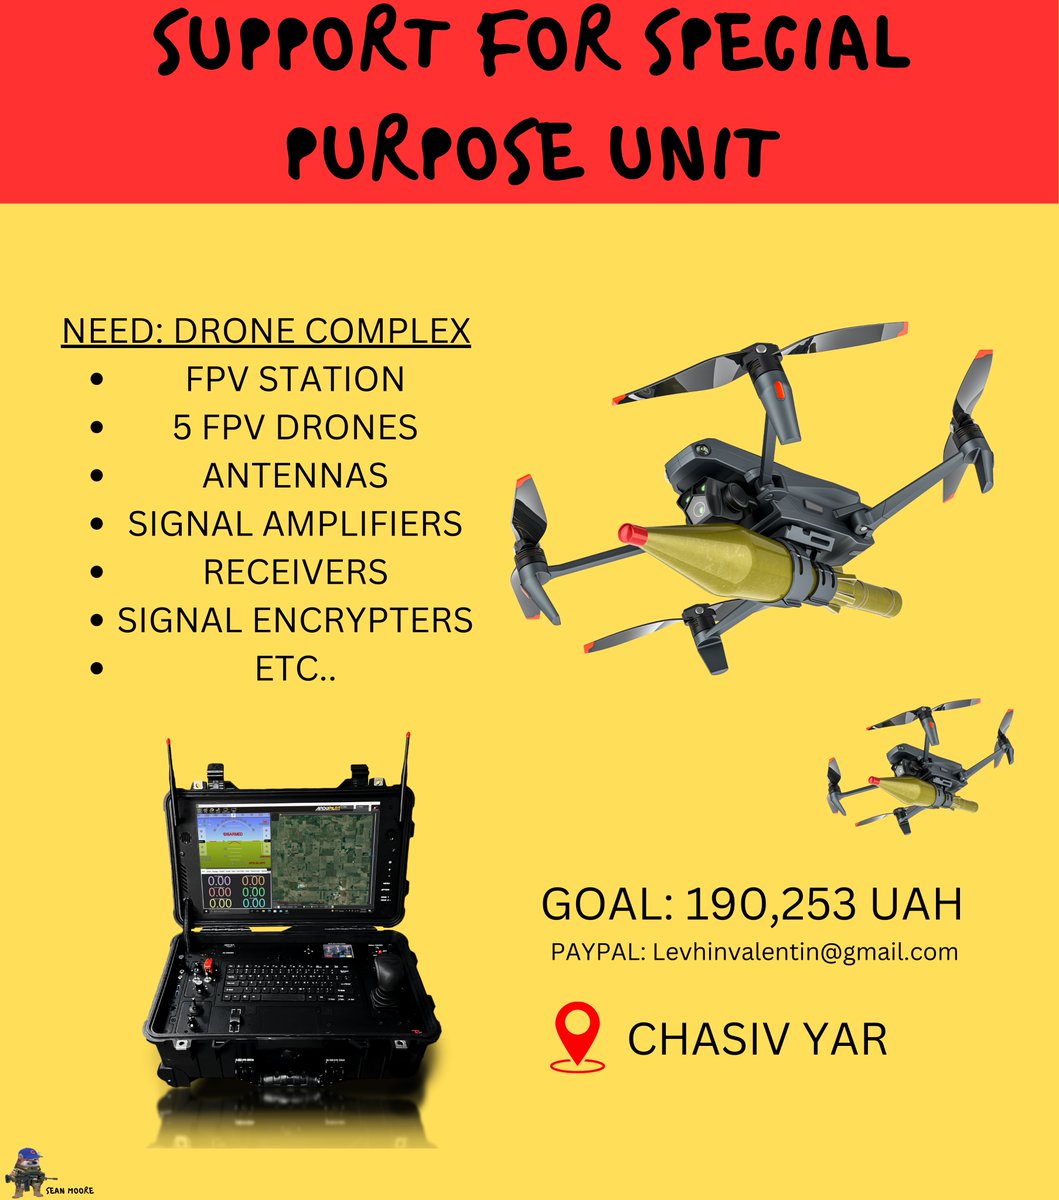 A drone complex is needed near Chasiv Yar! This includes an FPV control station, 5 FPV drones, antennas, amplifiers, receivers, and other equipment

Please share, boost, and donate 🙏💙💛

Donate:
Monobank: send.monobank.ua/jar/3MrkYX5Zha
PP: Levhinvalentin@gmail.com